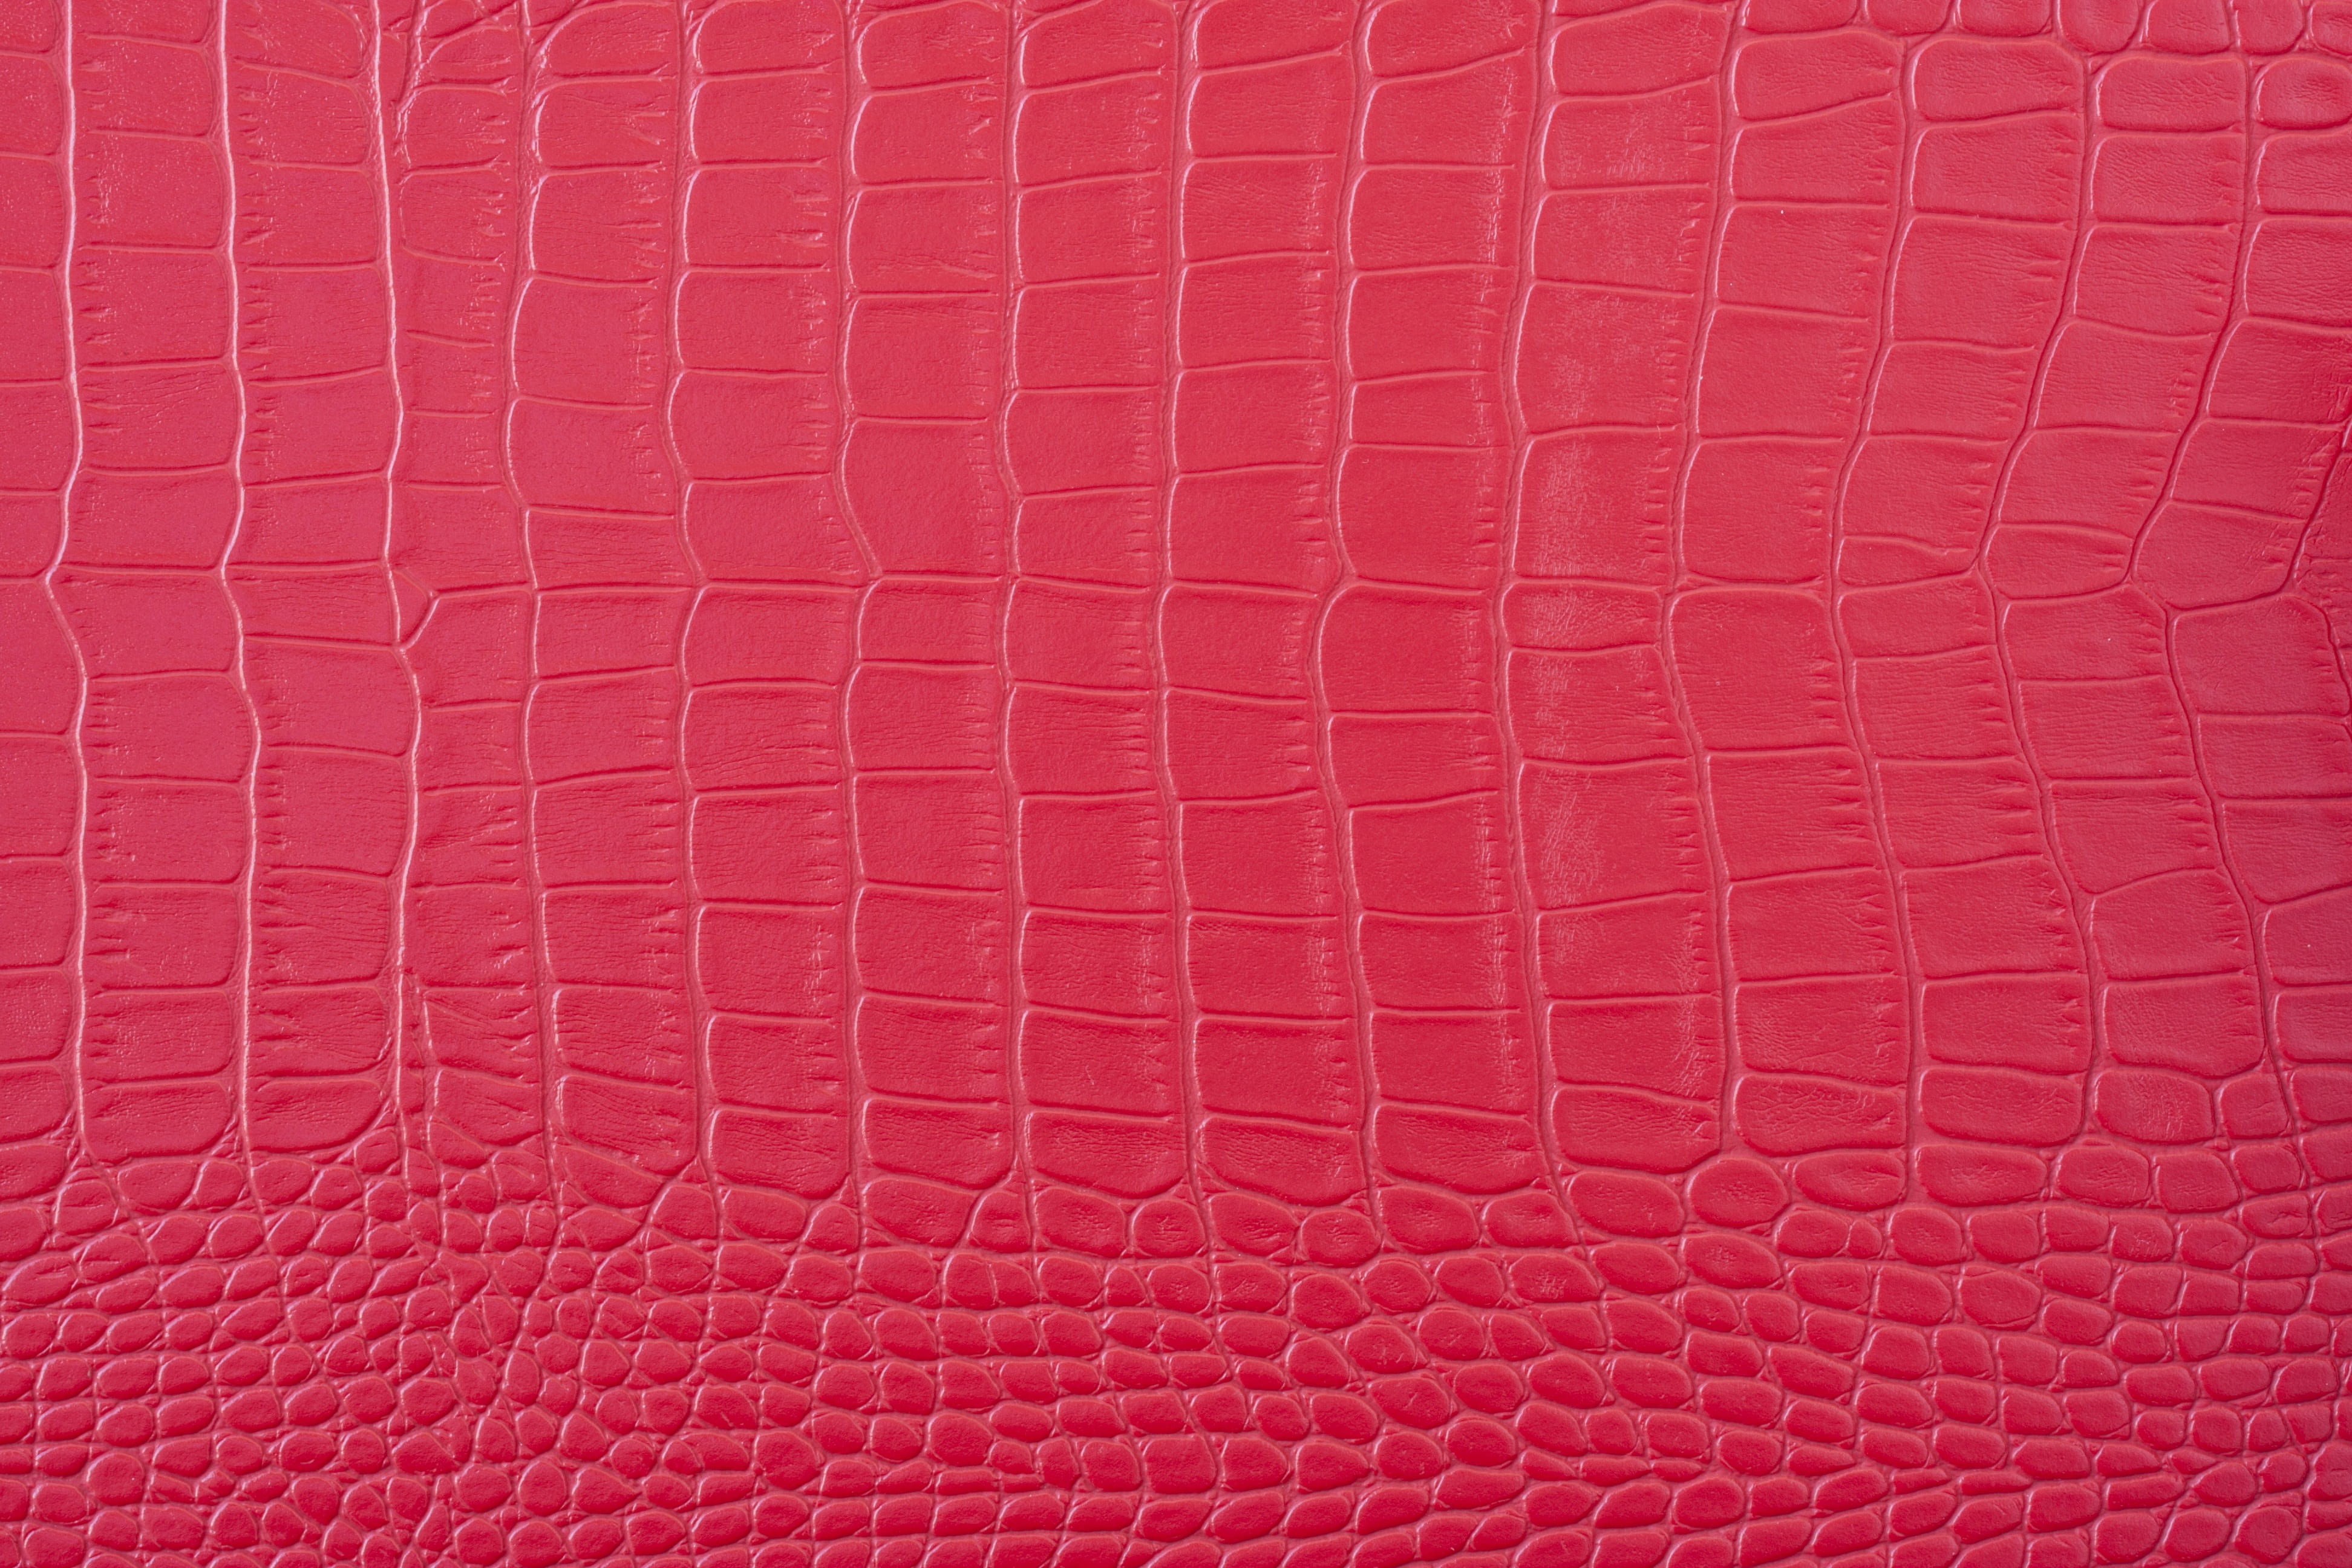 pink leather surface, red, skin, texture, pattern, bag, design